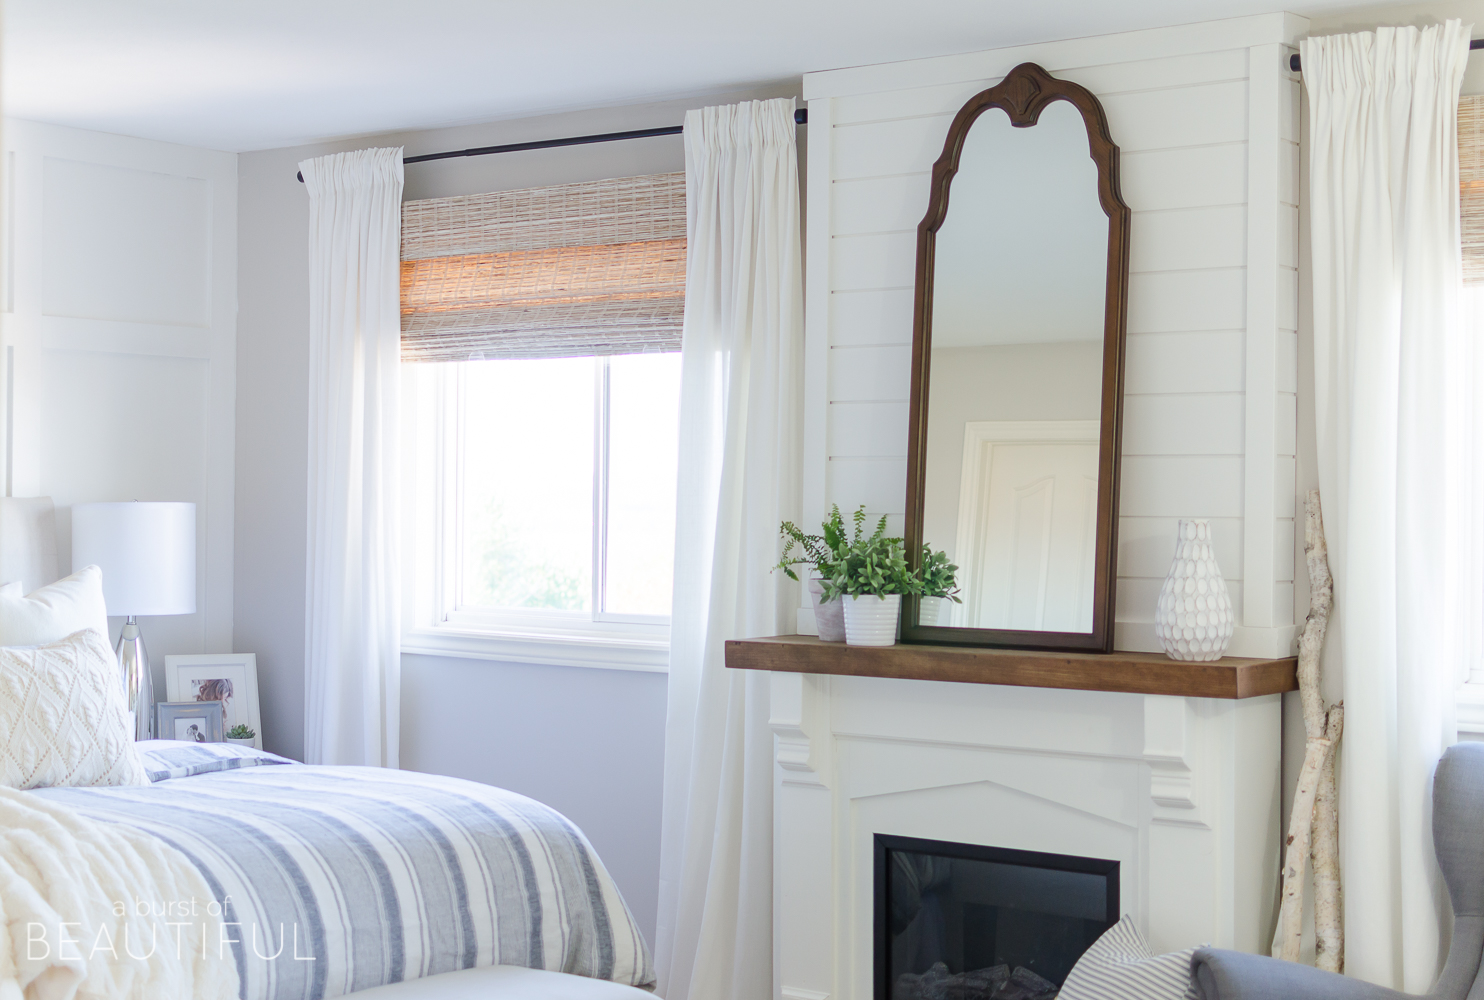 This cozy farmhouse master bedroom features a beautiful DIY shiplap fireplace, indigo ticking strip bedding and woven wood shades. 